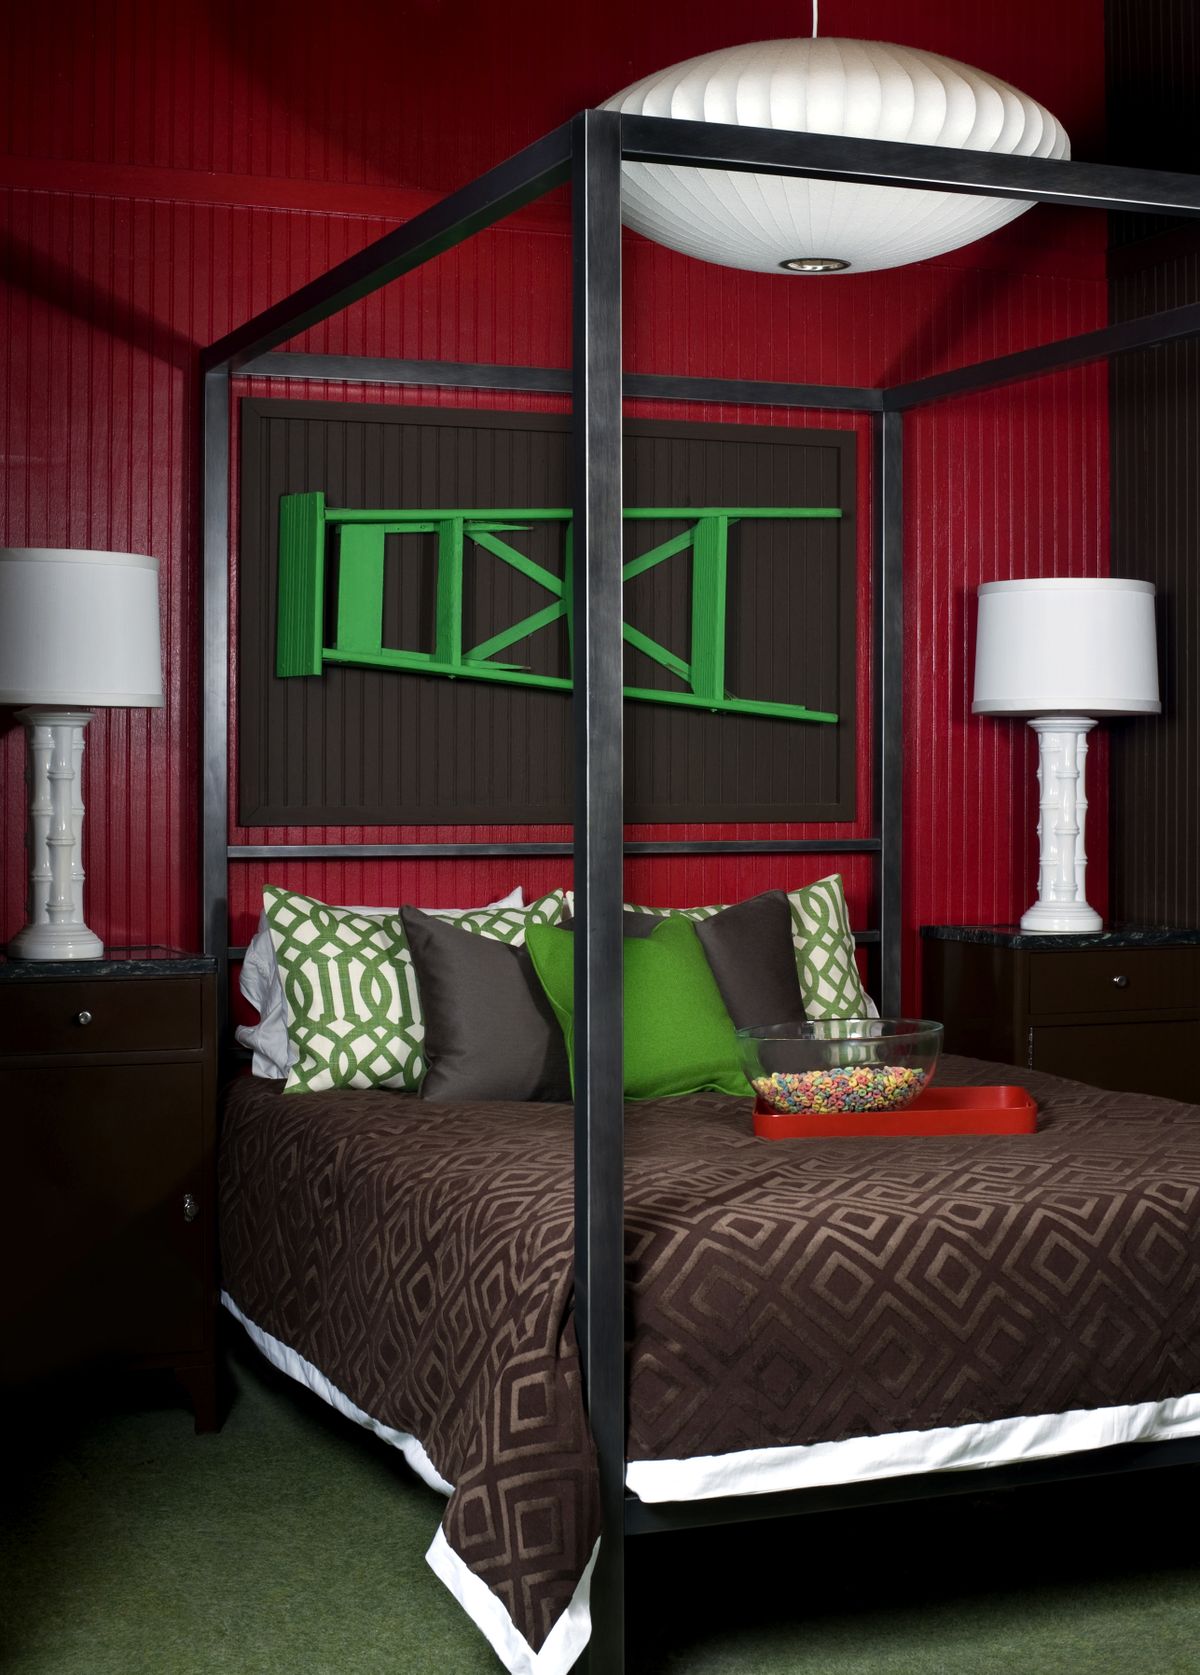 Brian Patrick Flynn designed this bedroom using a palette of black-brown, ultra-white, kelly green and fire engine red.